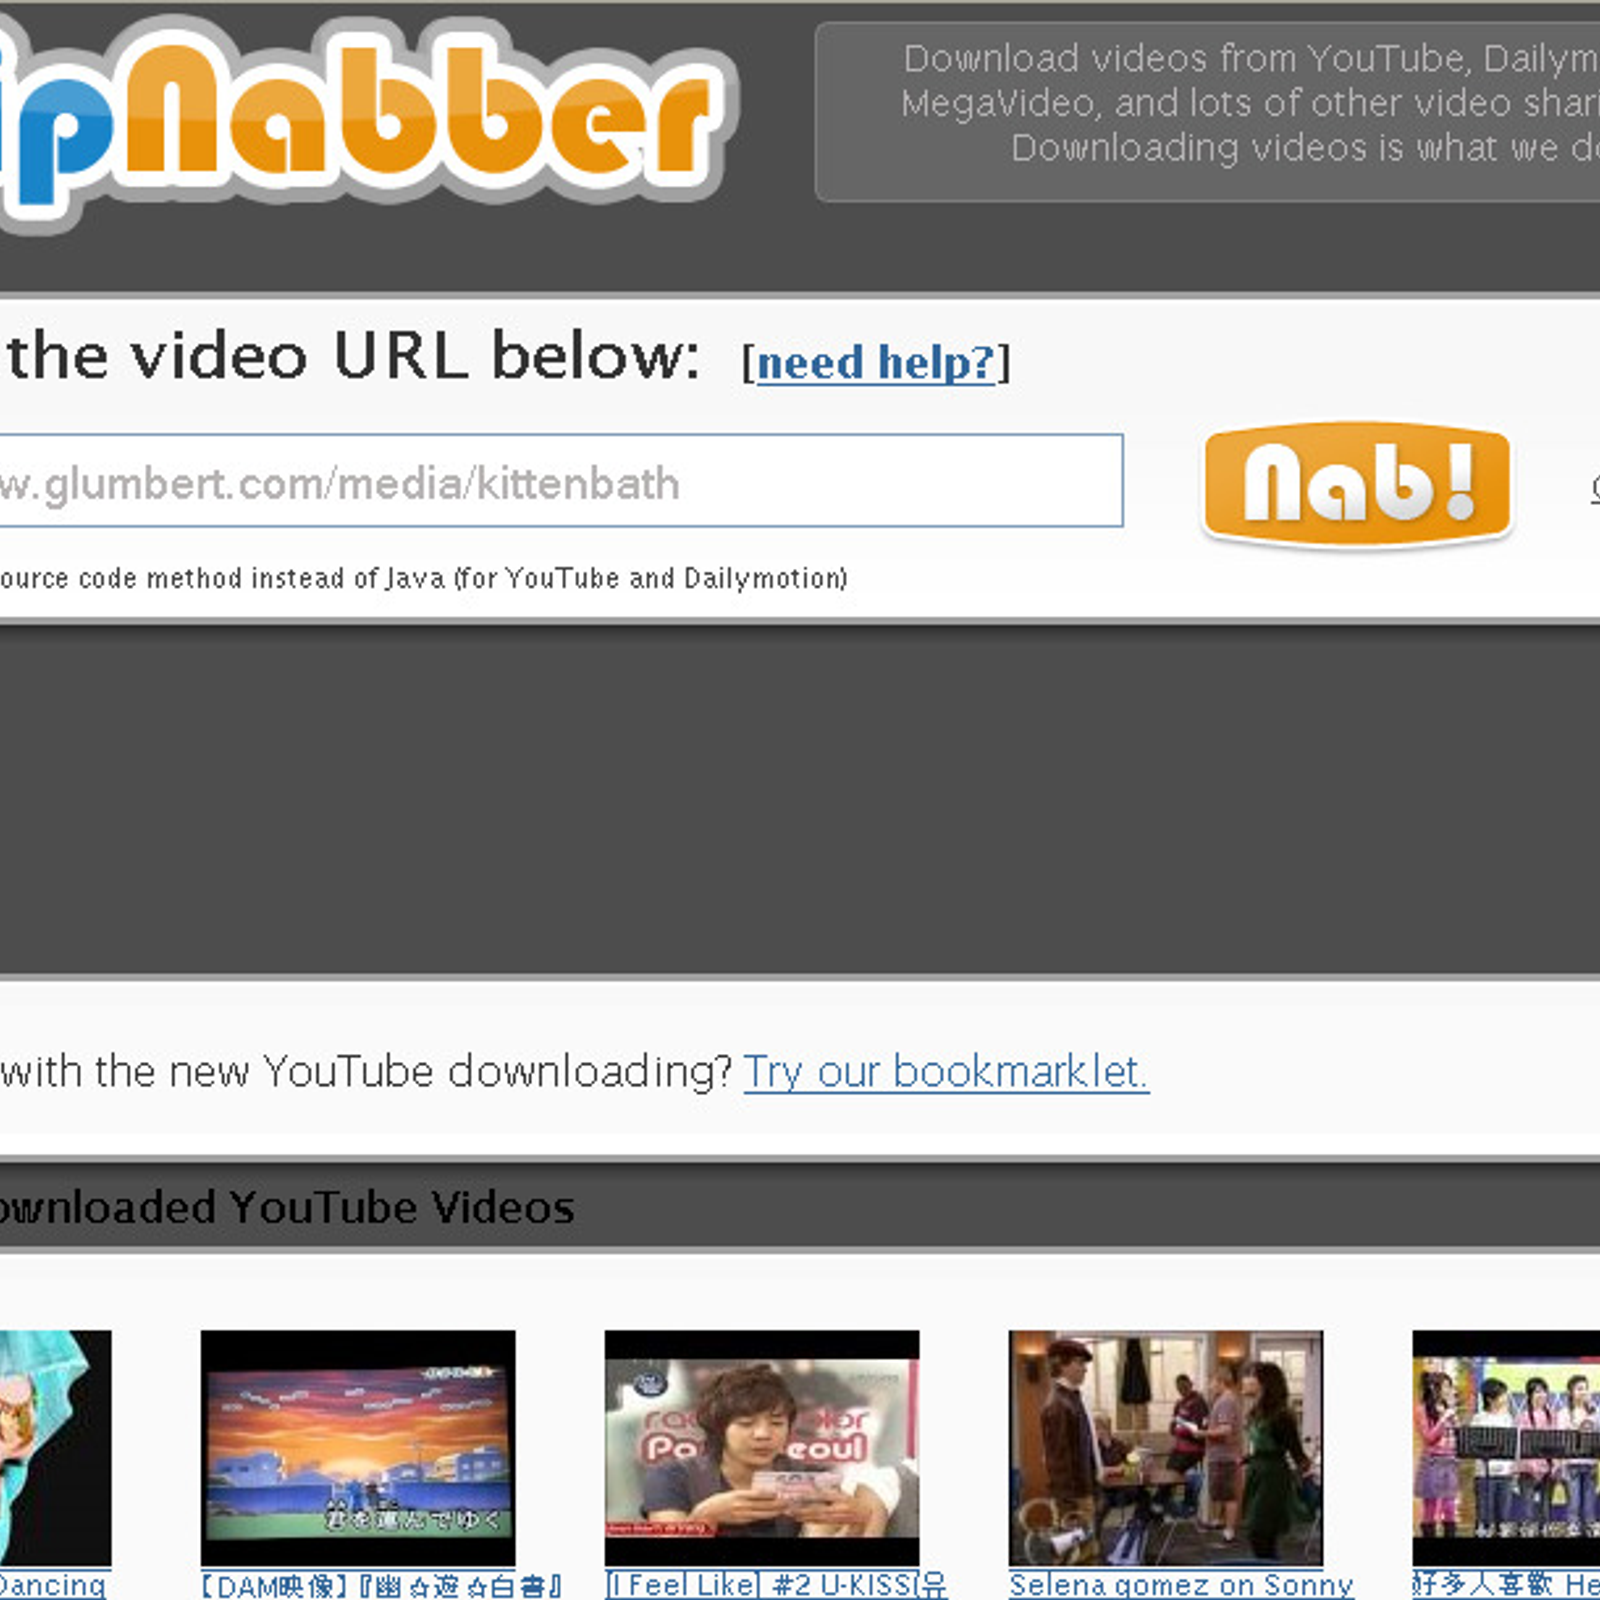 What websites are similar to YouTube?